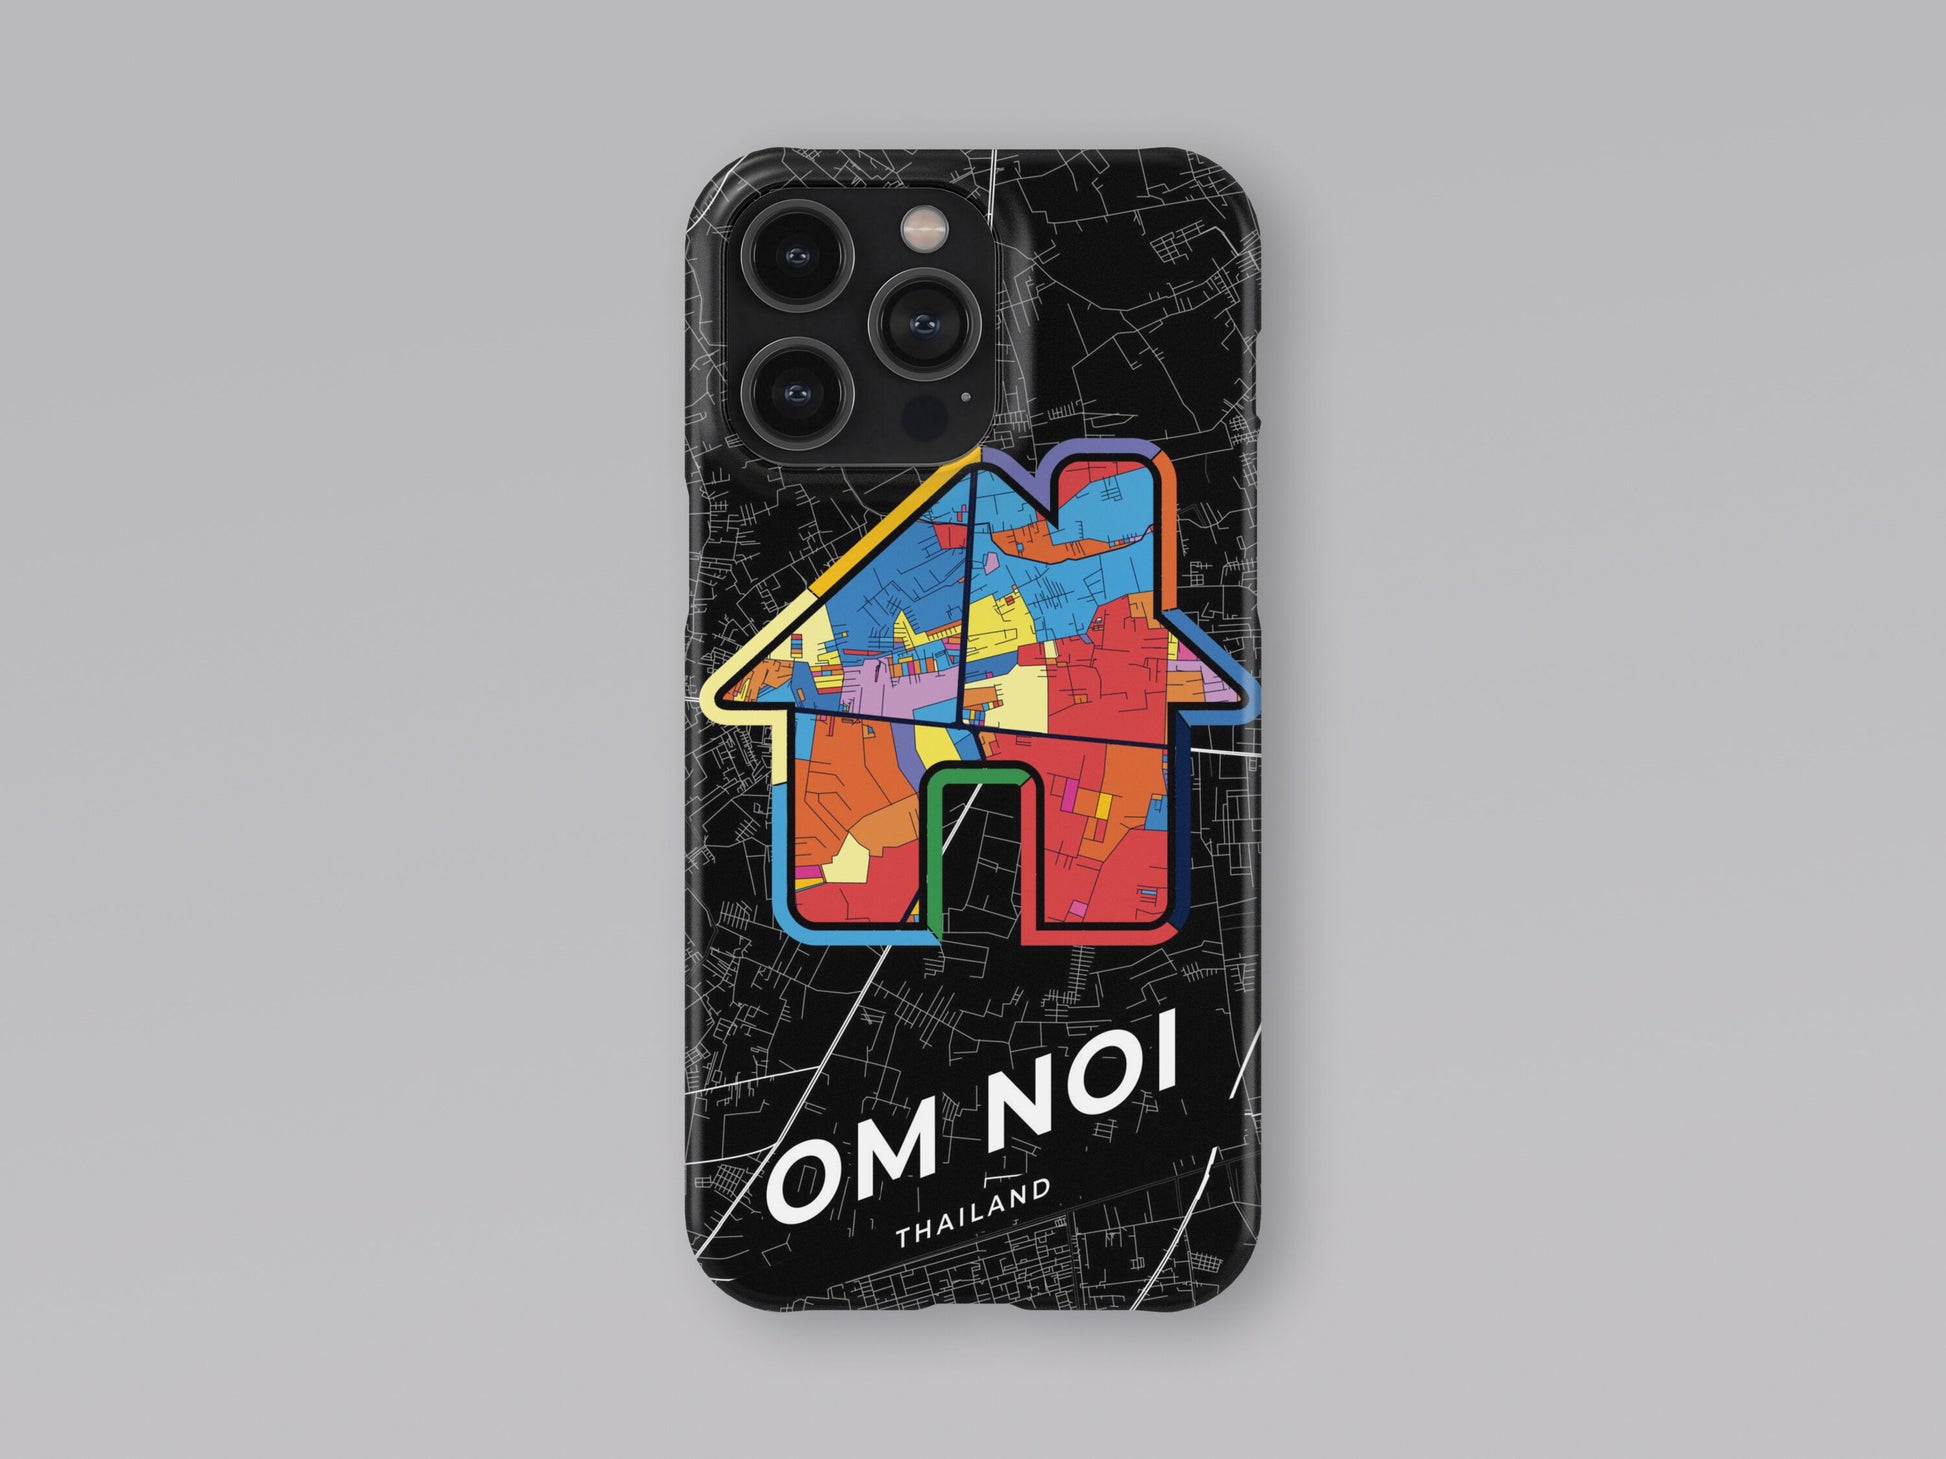 Om Noi Thailand slim phone case with colorful icon 3